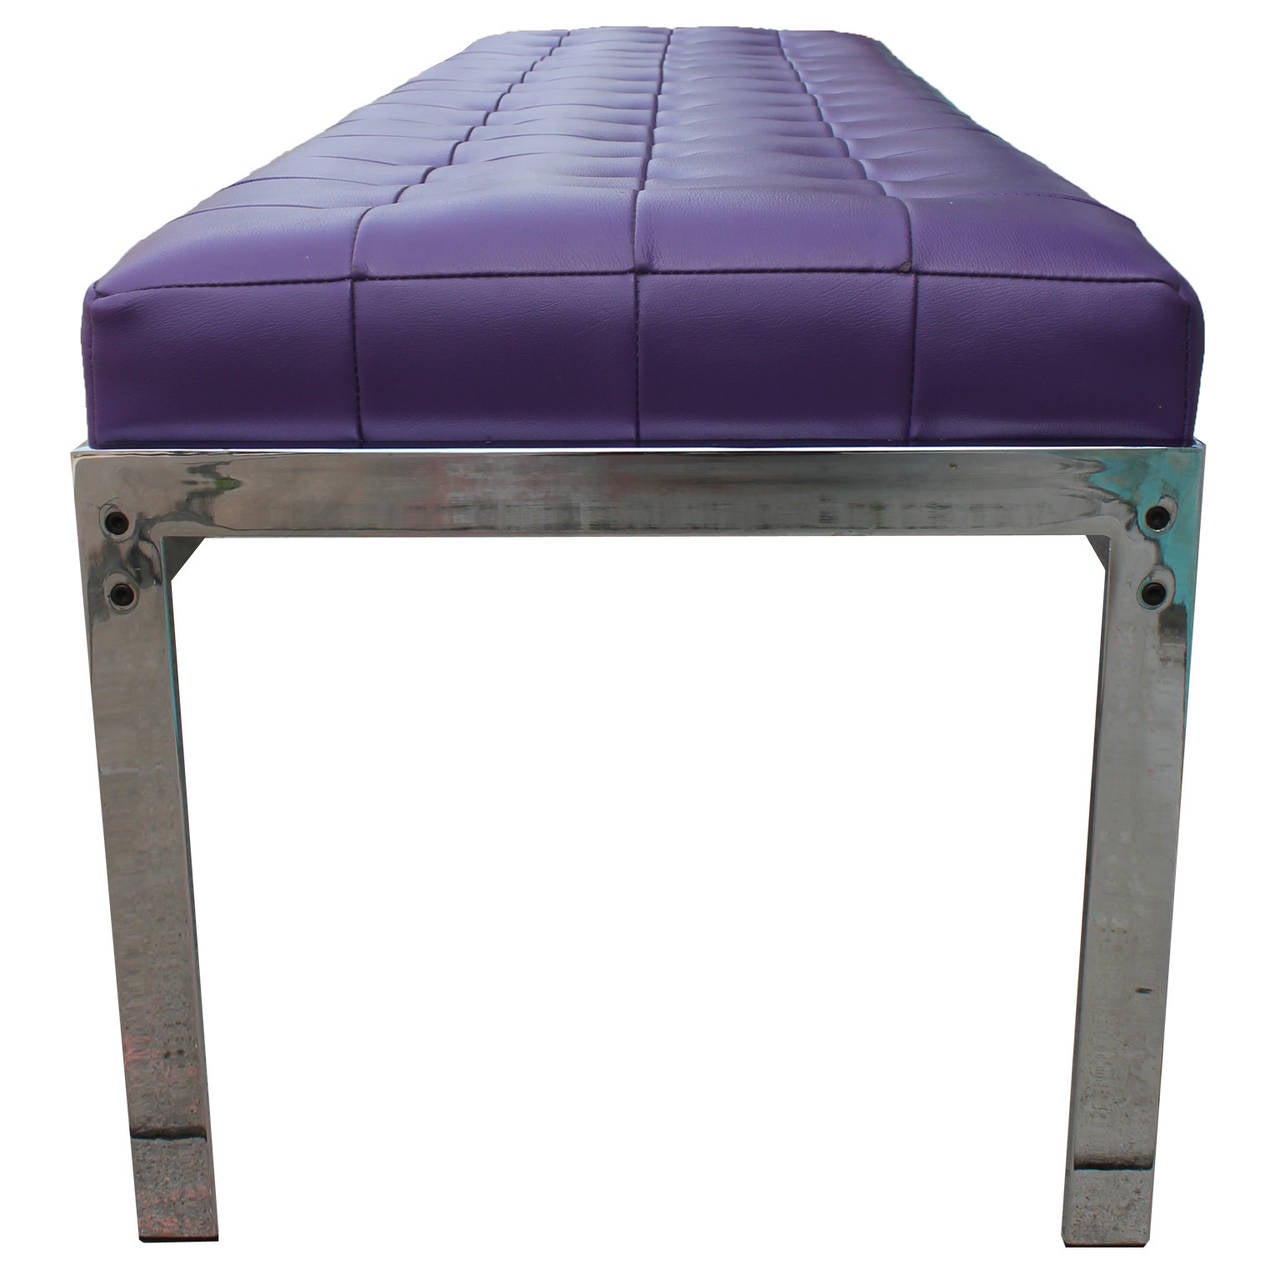 American Chrome and Purple Tufted Bench